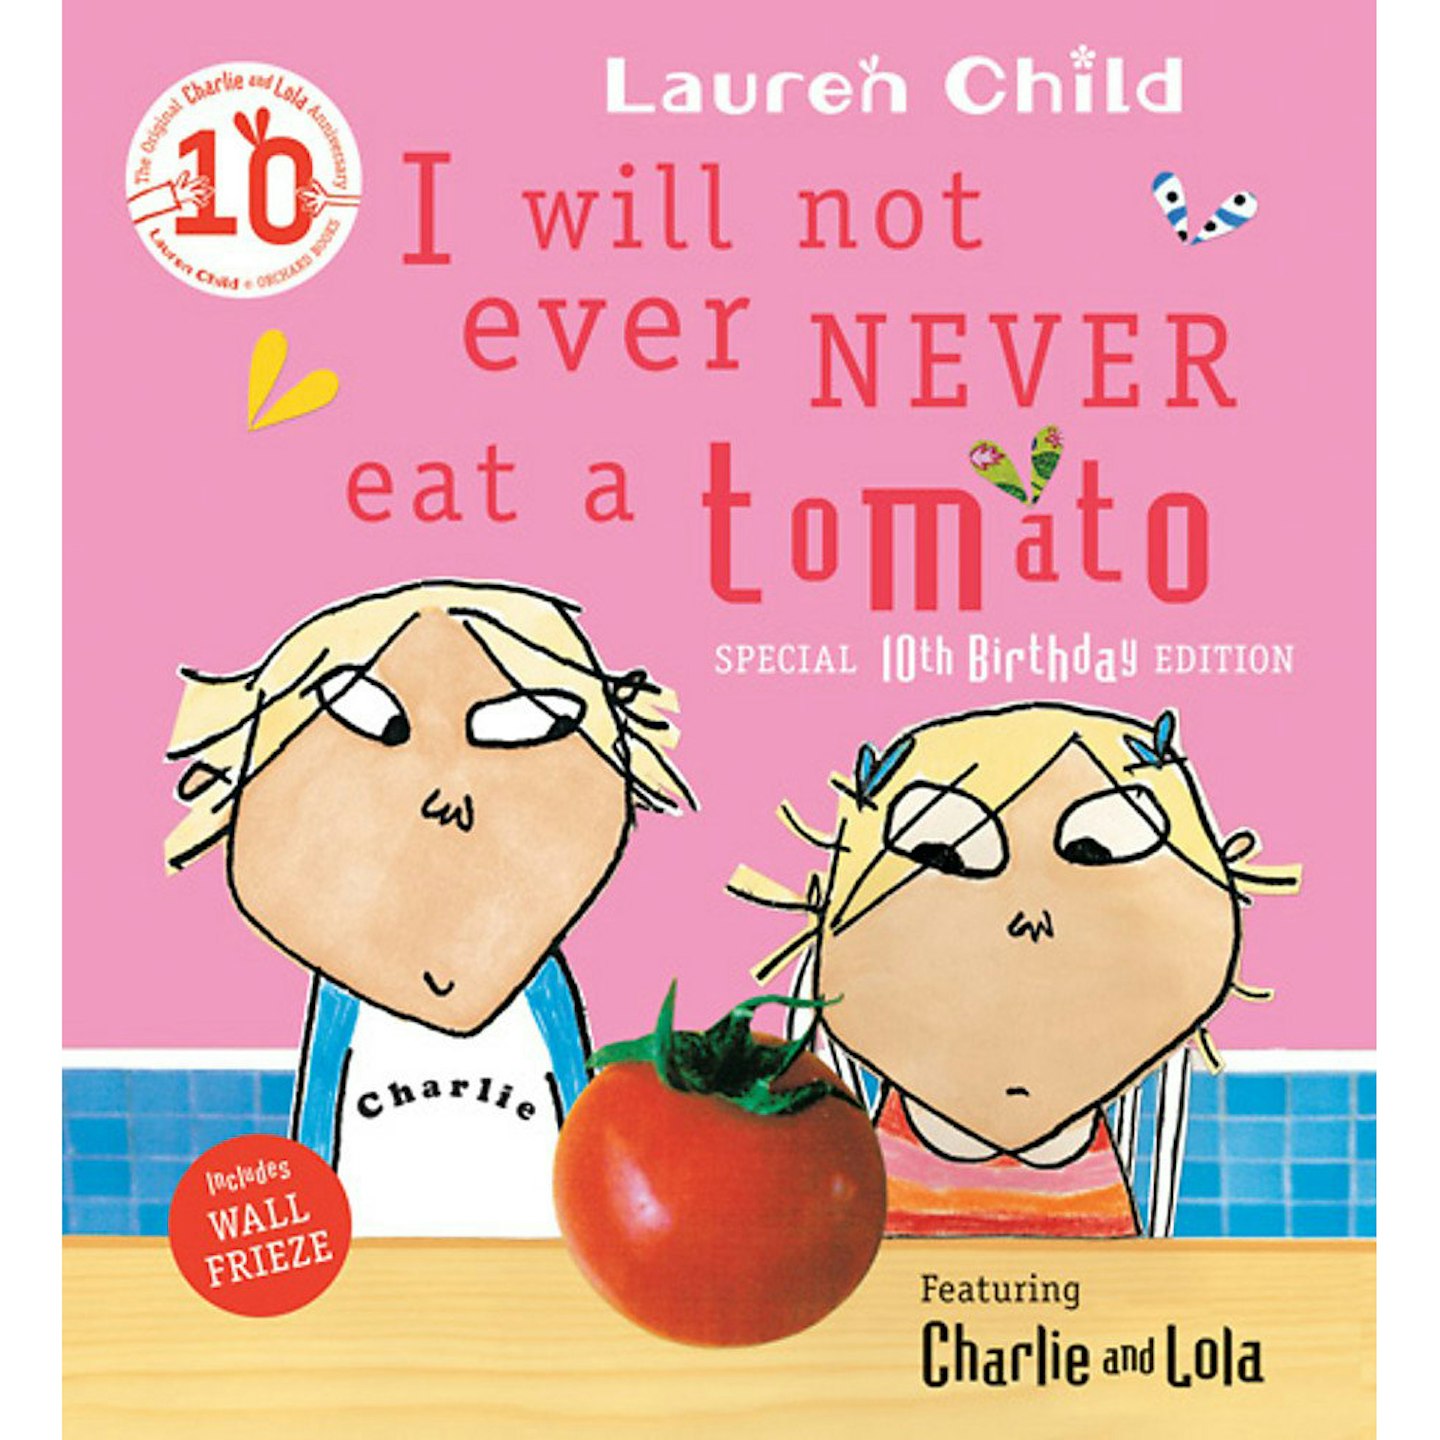 I Will Not Ever Never Eat a Tomato (Charlie and Lola) by Lauren Child